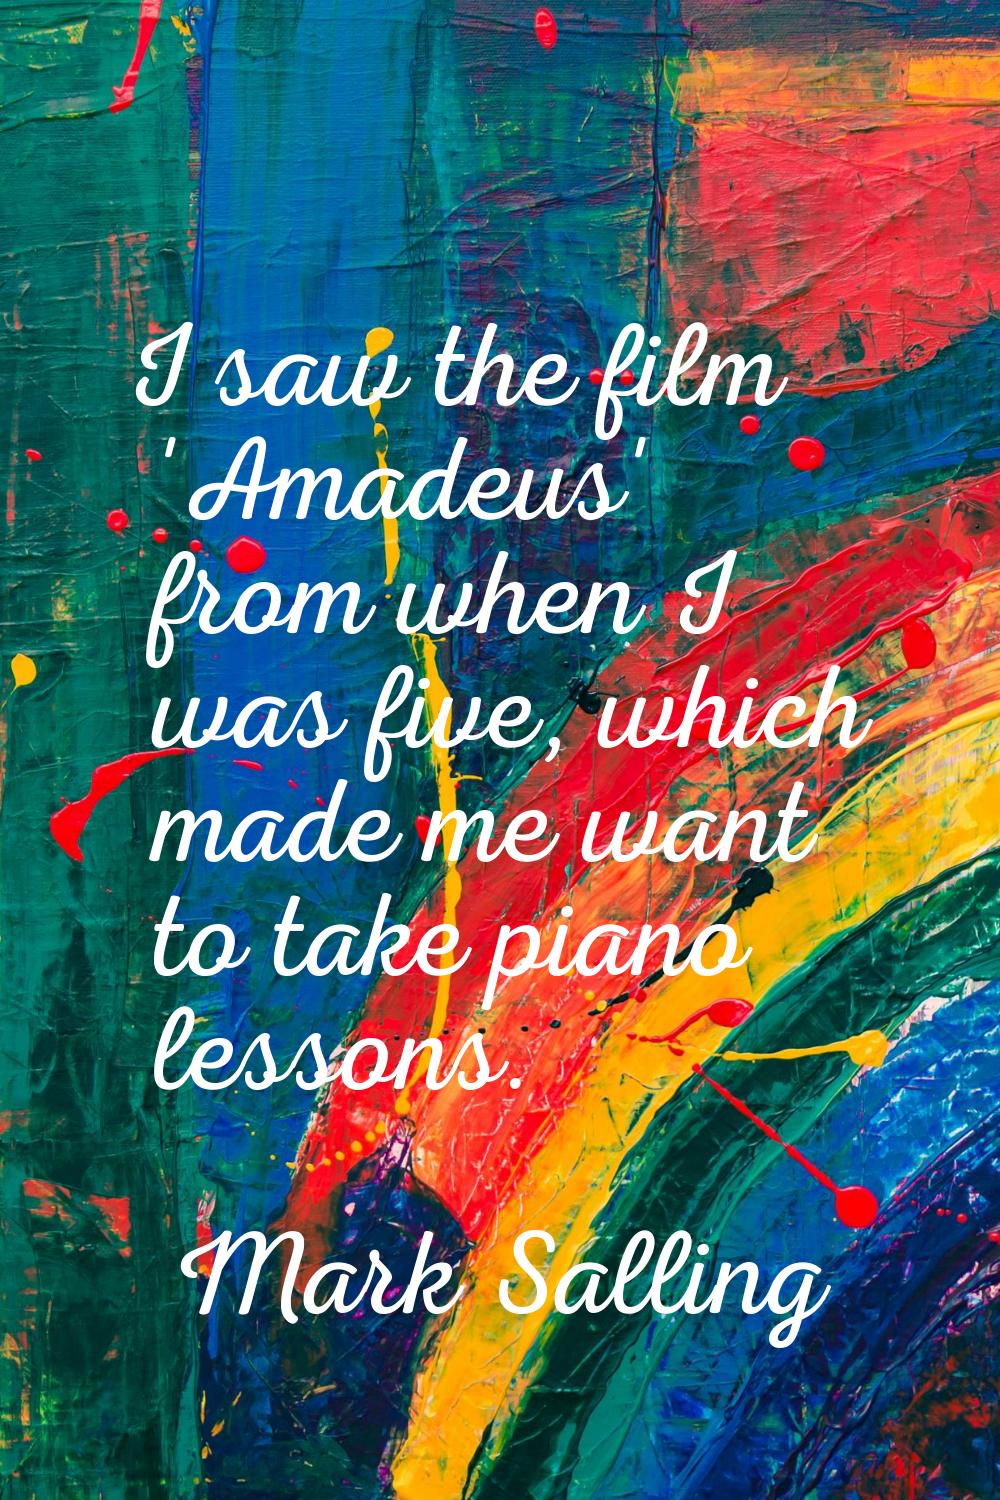 I saw the film 'Amadeus' from when I was five, which made me want to take piano lessons.